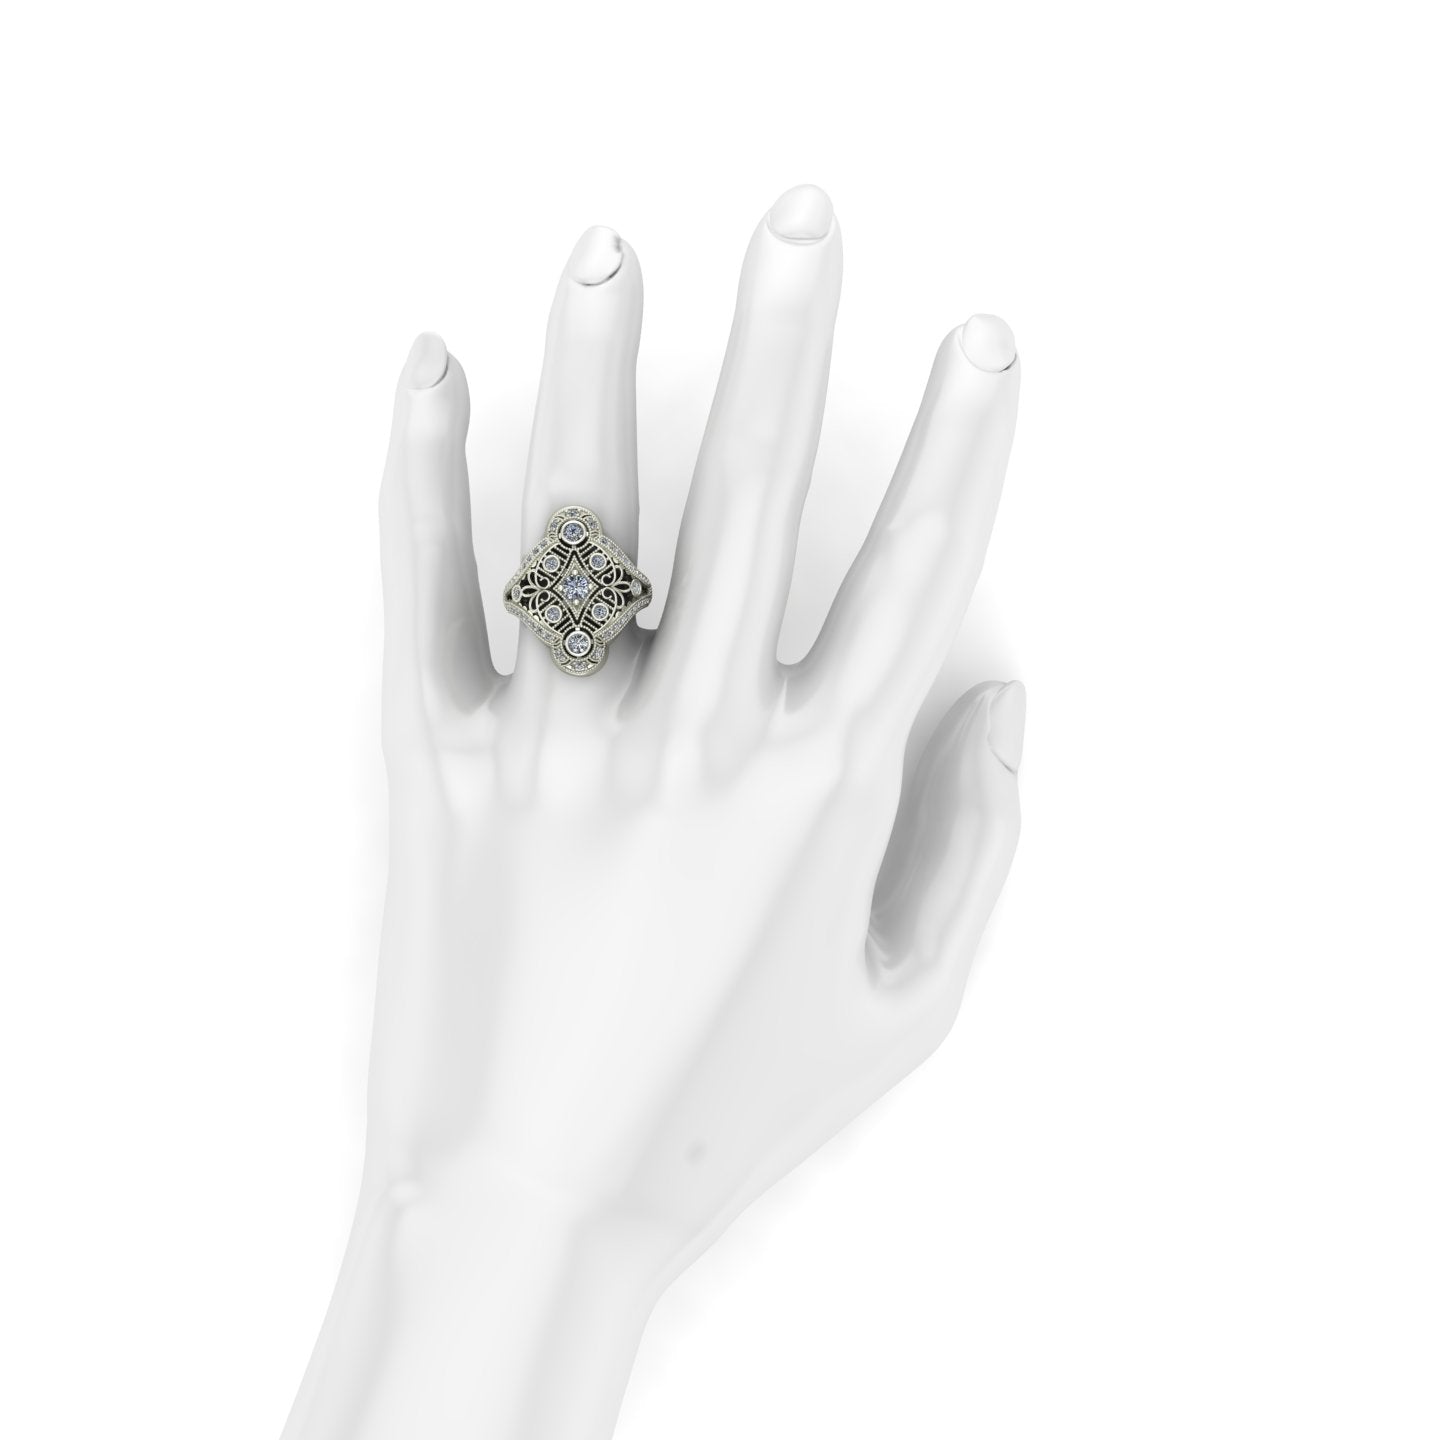 one carat diamond vintage style cocktail ring in 14k white gold - Charles Babb Designs - on hand